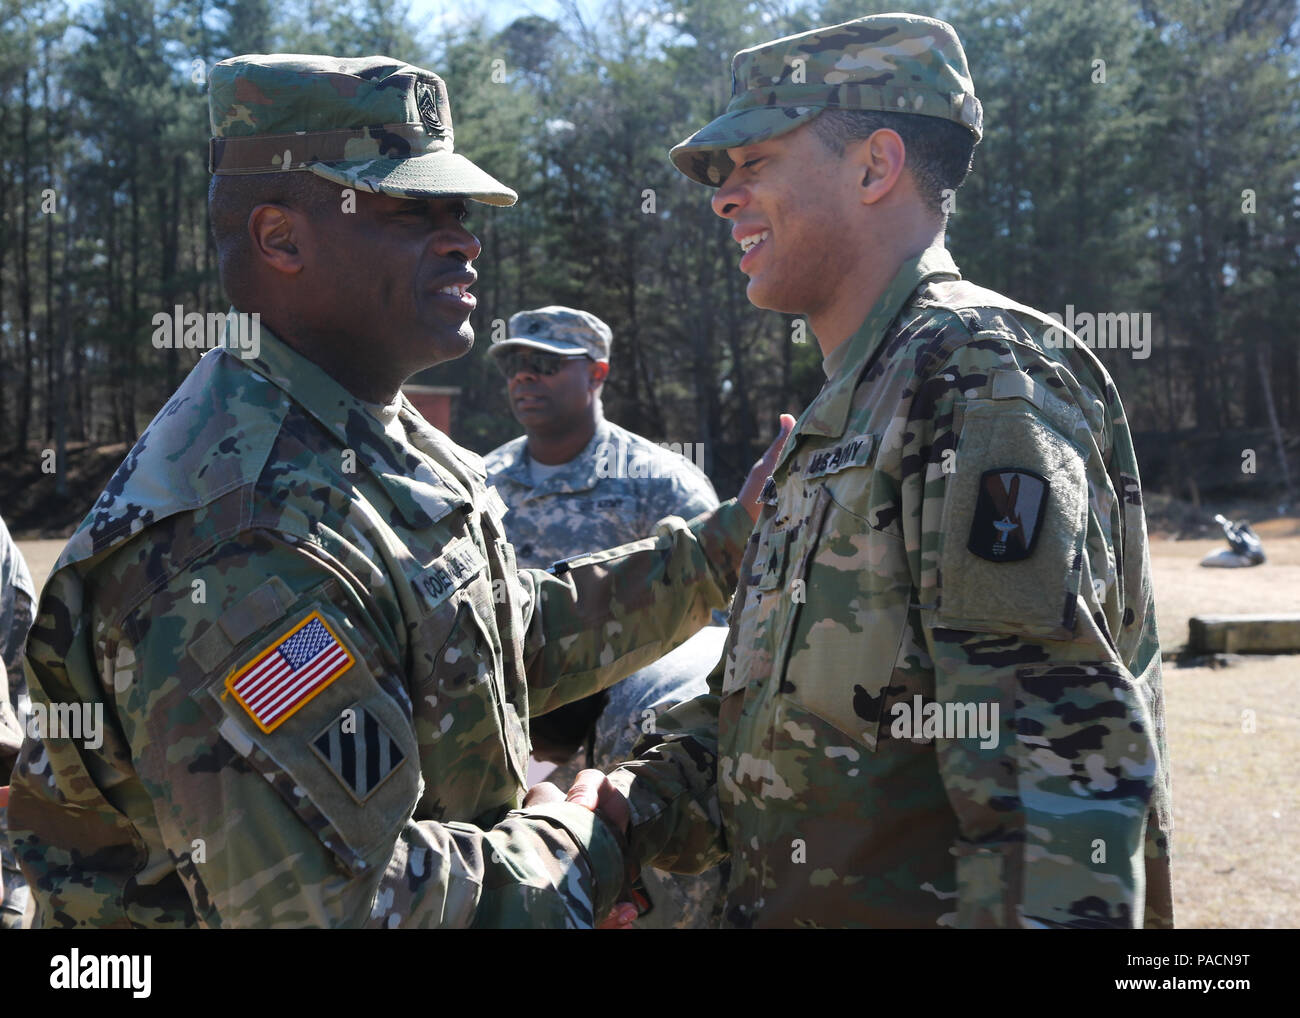 U.S. Army Command Sgt. Maj. Timothy Coleman, assigned to 114th Signal Battalion, congratulates Sgt. Samuel Nobles following his promotion at Fort George G. Meade, Md., March 2, 2016. The promotion from Specialist to Sergeant marks the responsibility instilled into the new noncommissioned officer. (U.S. Army photo by Spc. Alyssa Madero/Released) Stock Photo